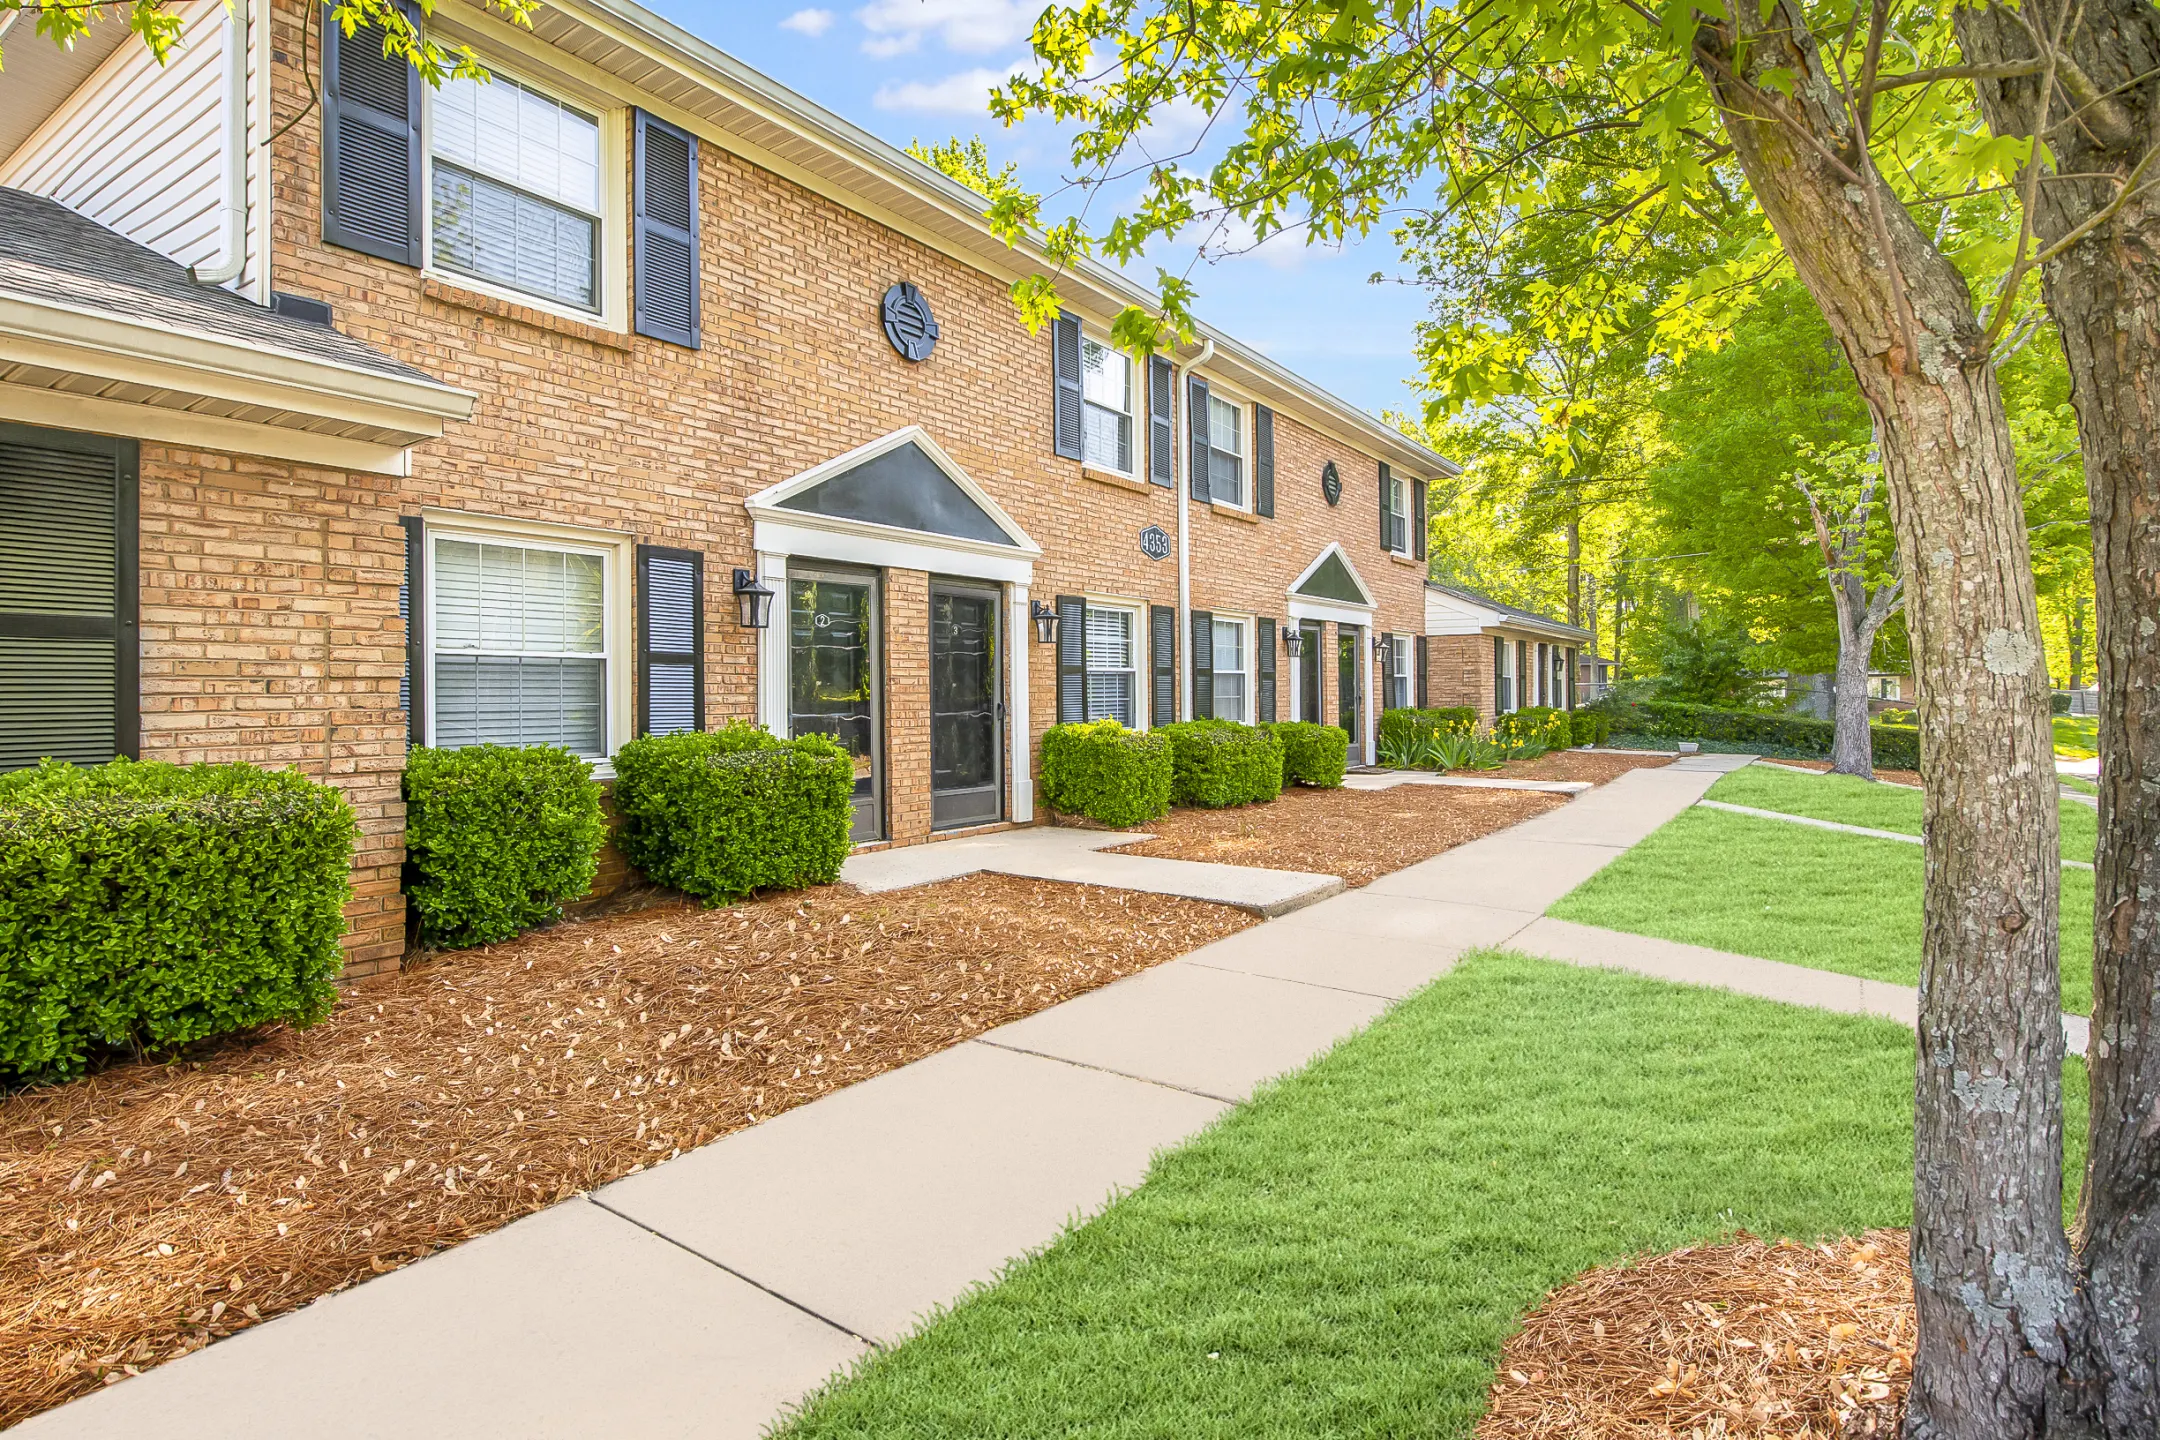 Building - Sage Pointe Apartments & Townhomes - Charlotte, NC